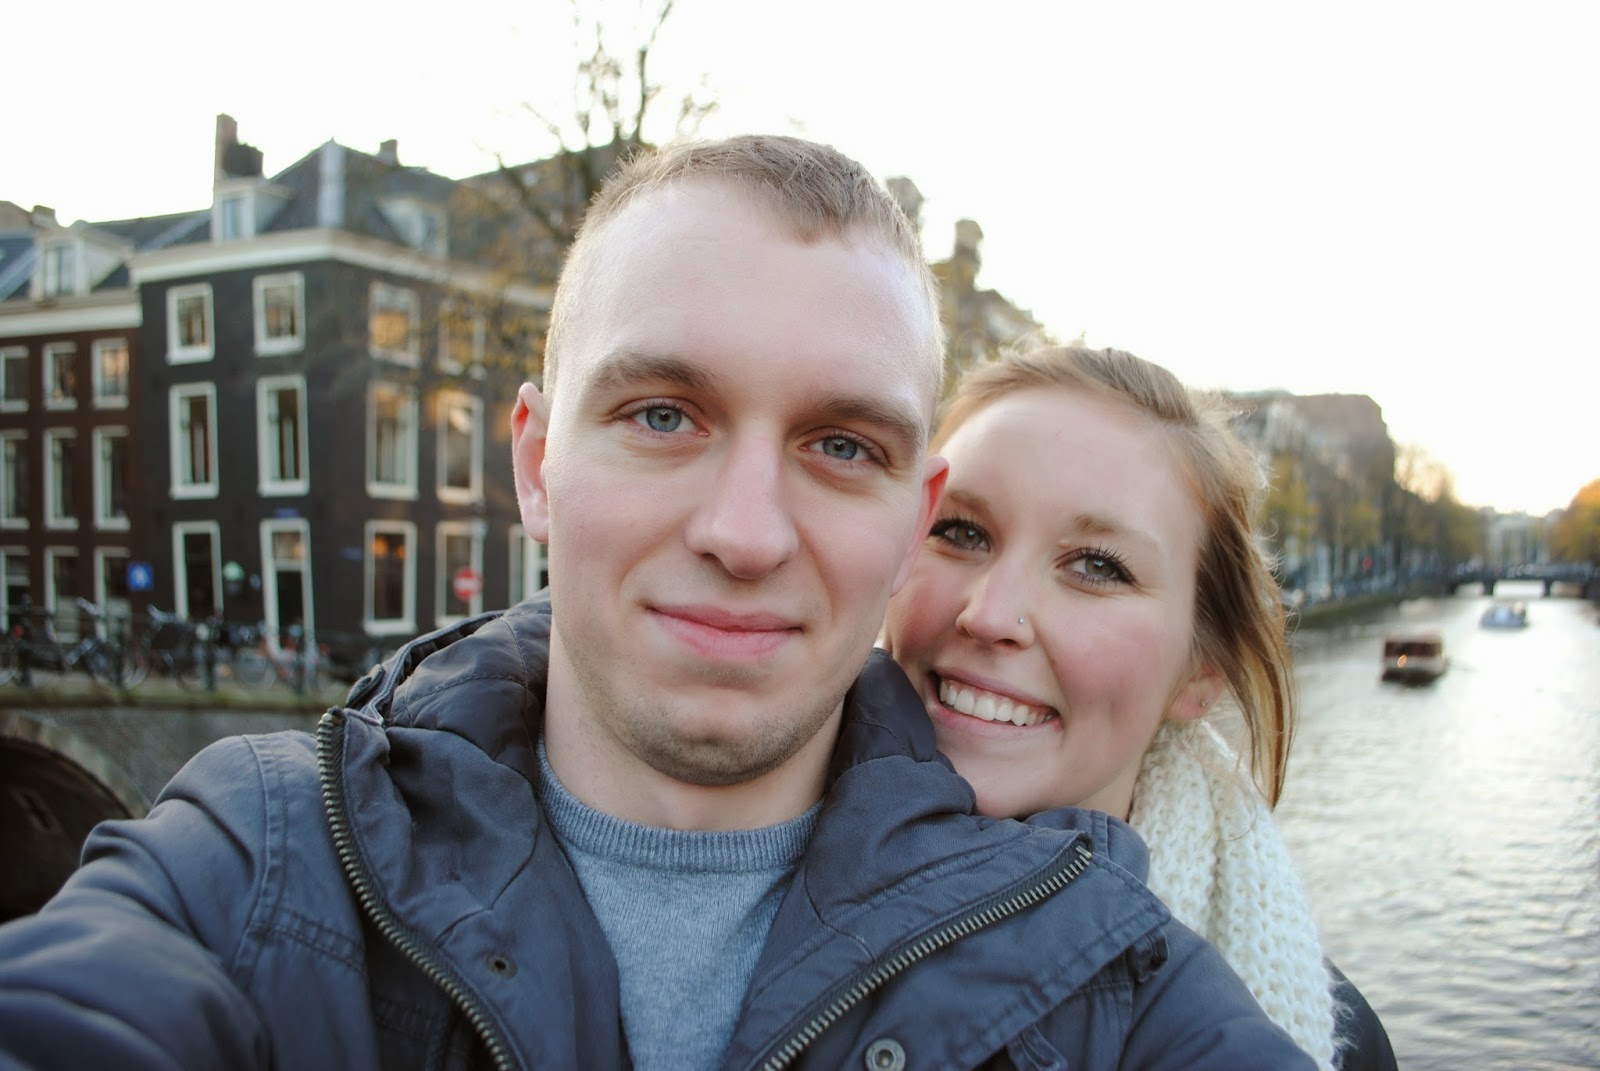 Ben and Erinn smile in Amsterdam.